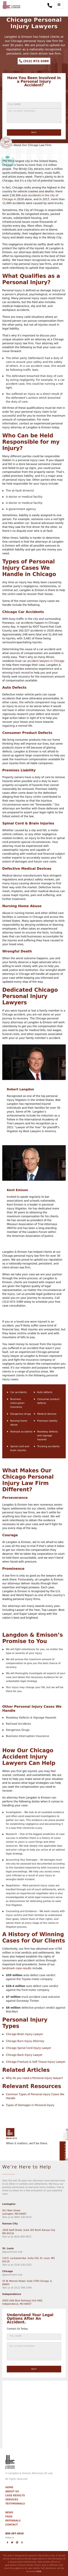 Langdon & Emison Attorneys at Law - Chicago IL Lawyers